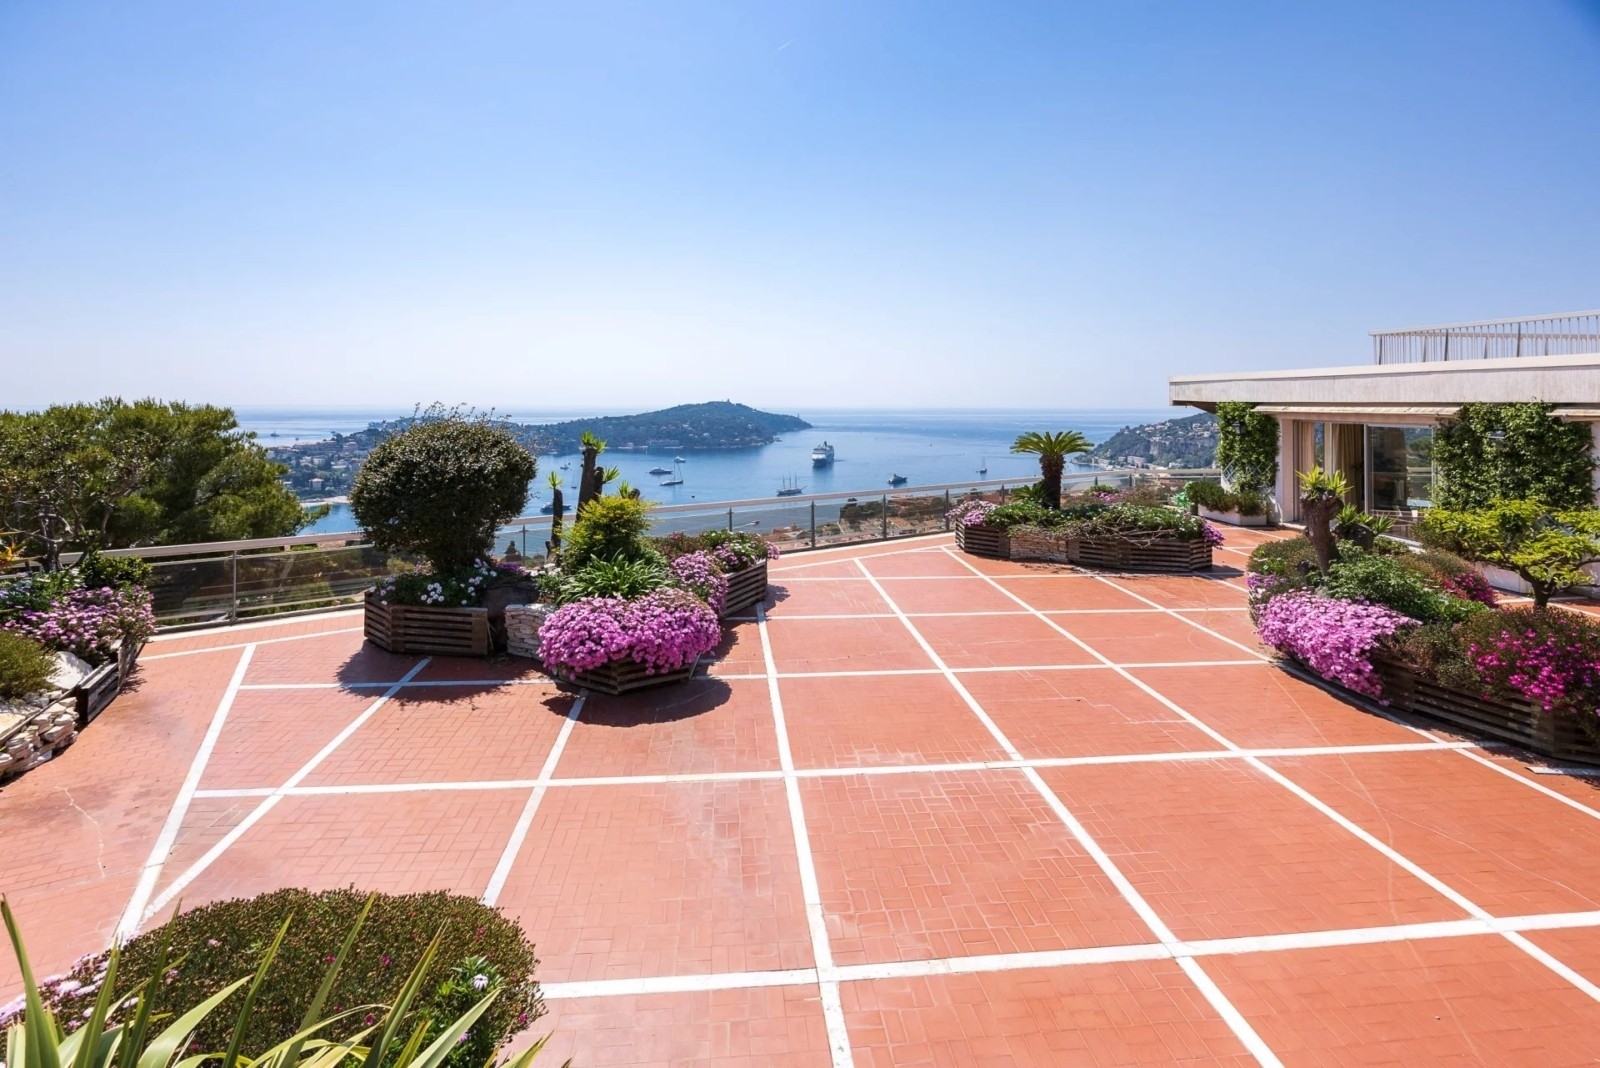 Nice Riviera - Real estate agency Nice Côte d'Azur | "EXCEPTIONAL PENTHOUSE APARTMENT IN VILLEFRANCHE-SUR-MER